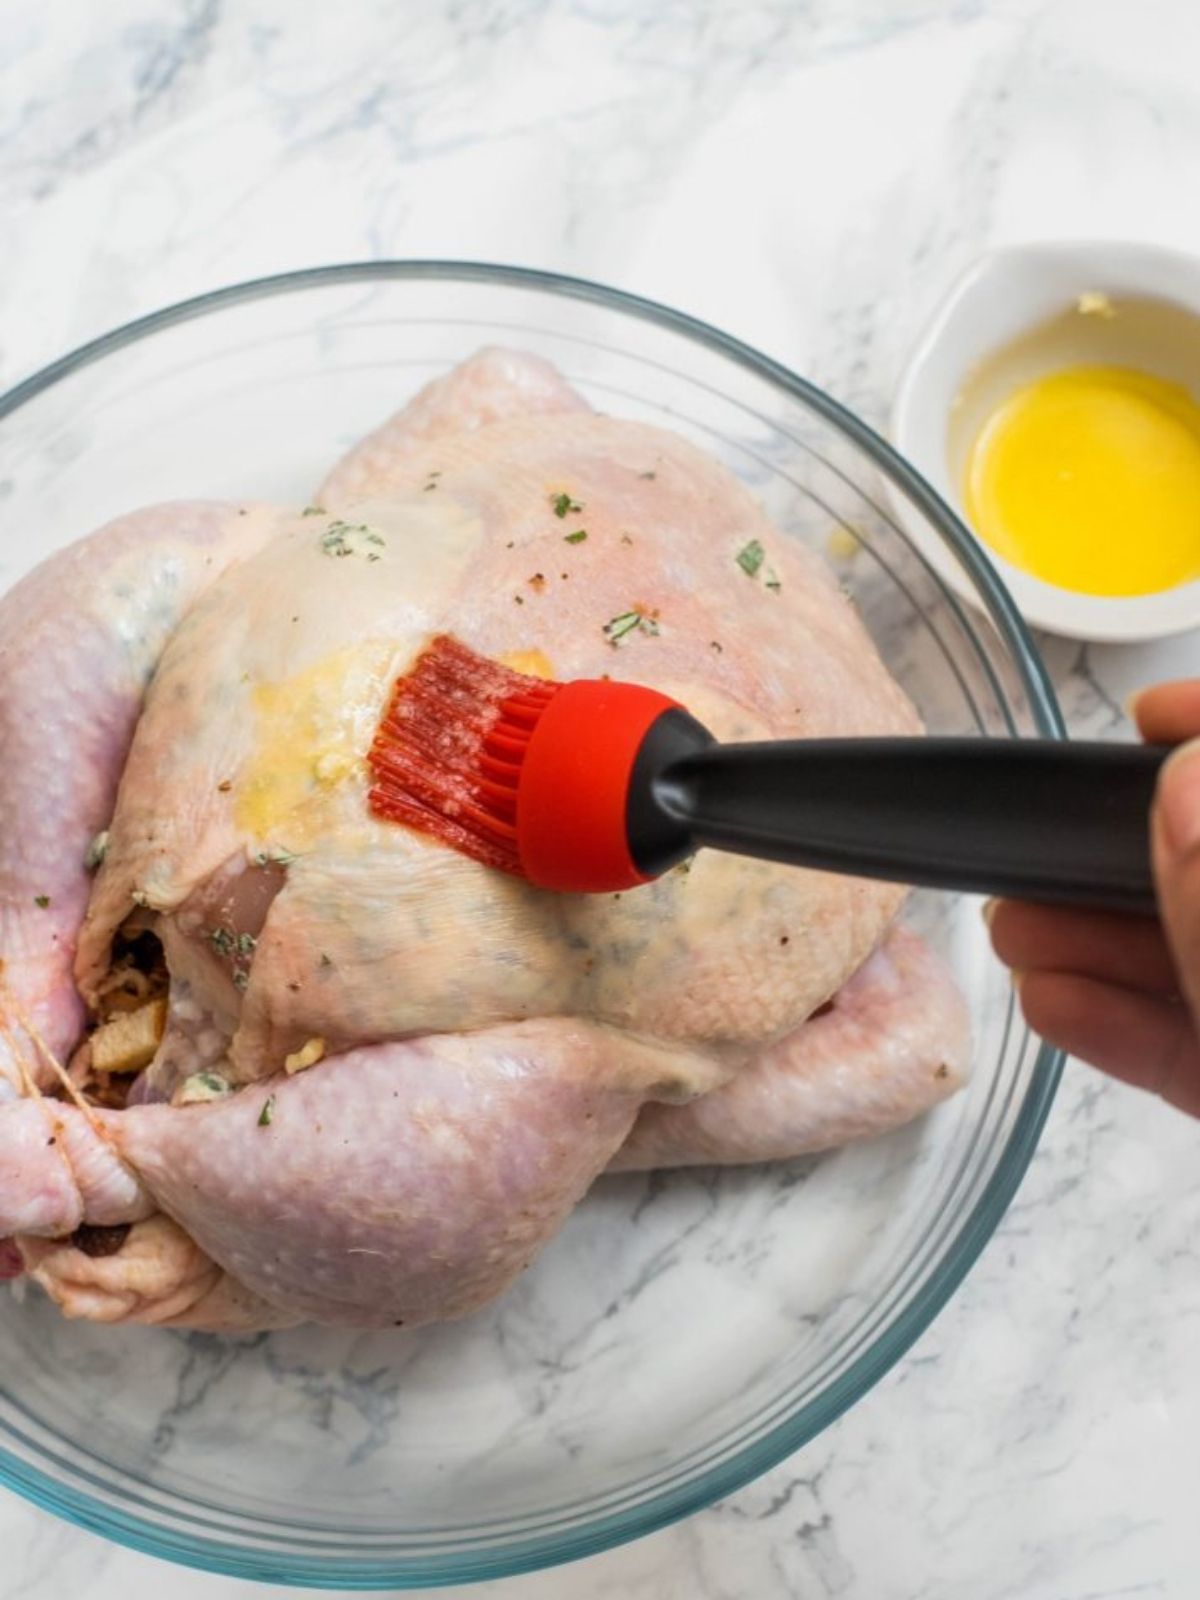 Preparing a Roast Chicken with Herbs and Spices 